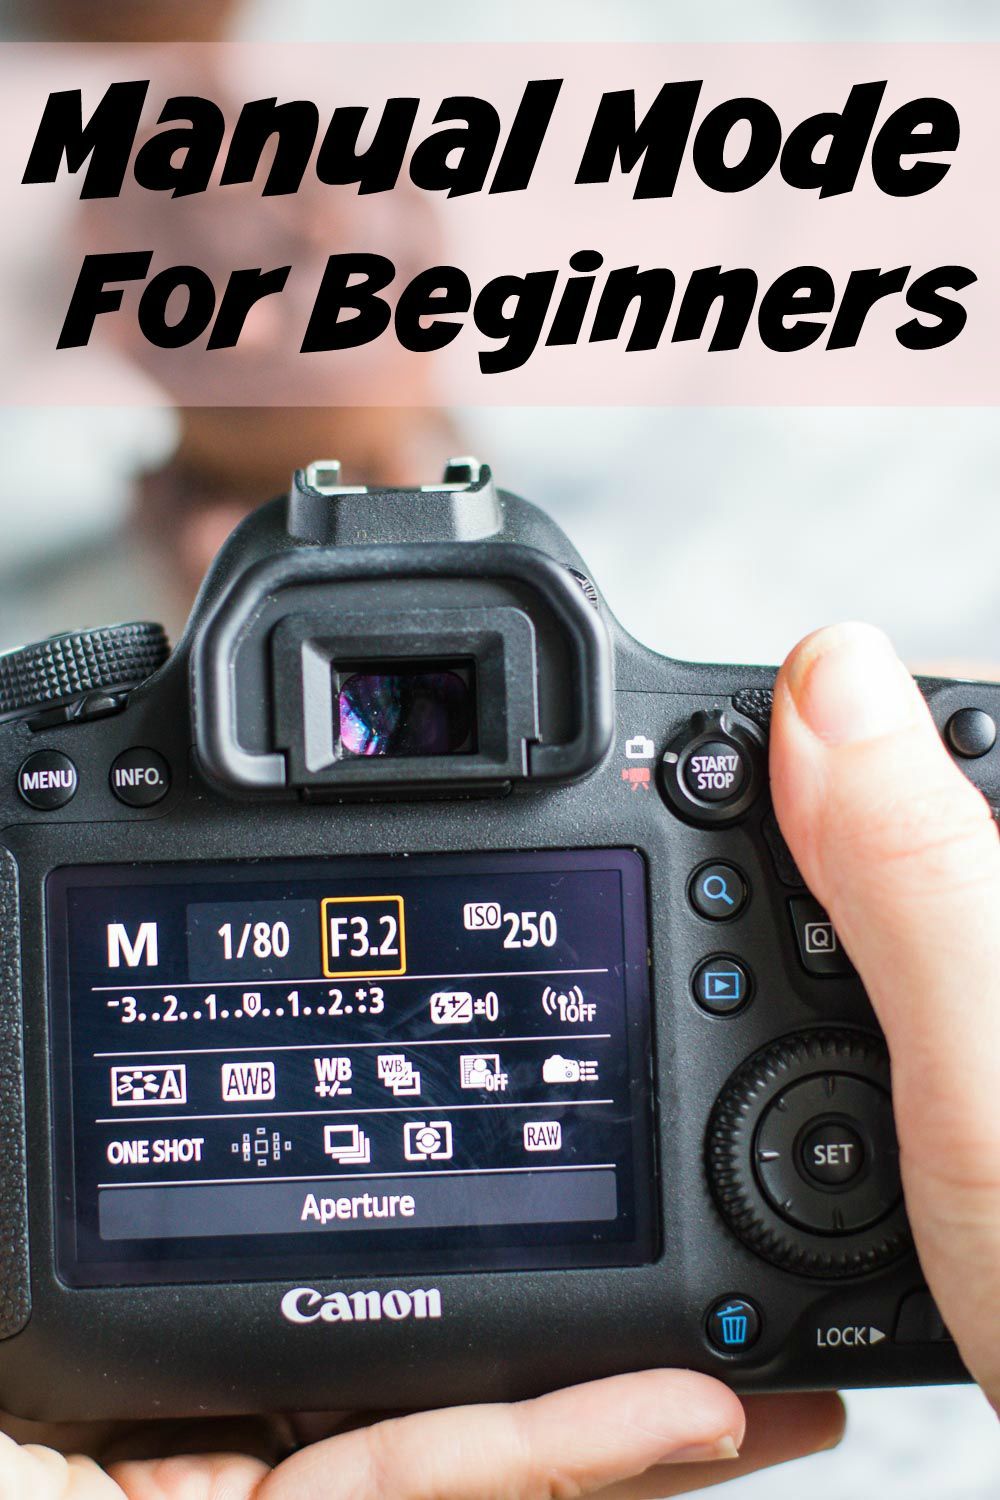 This post breaks down DSLR Manual Mode for Beginners. I focus specifically on food